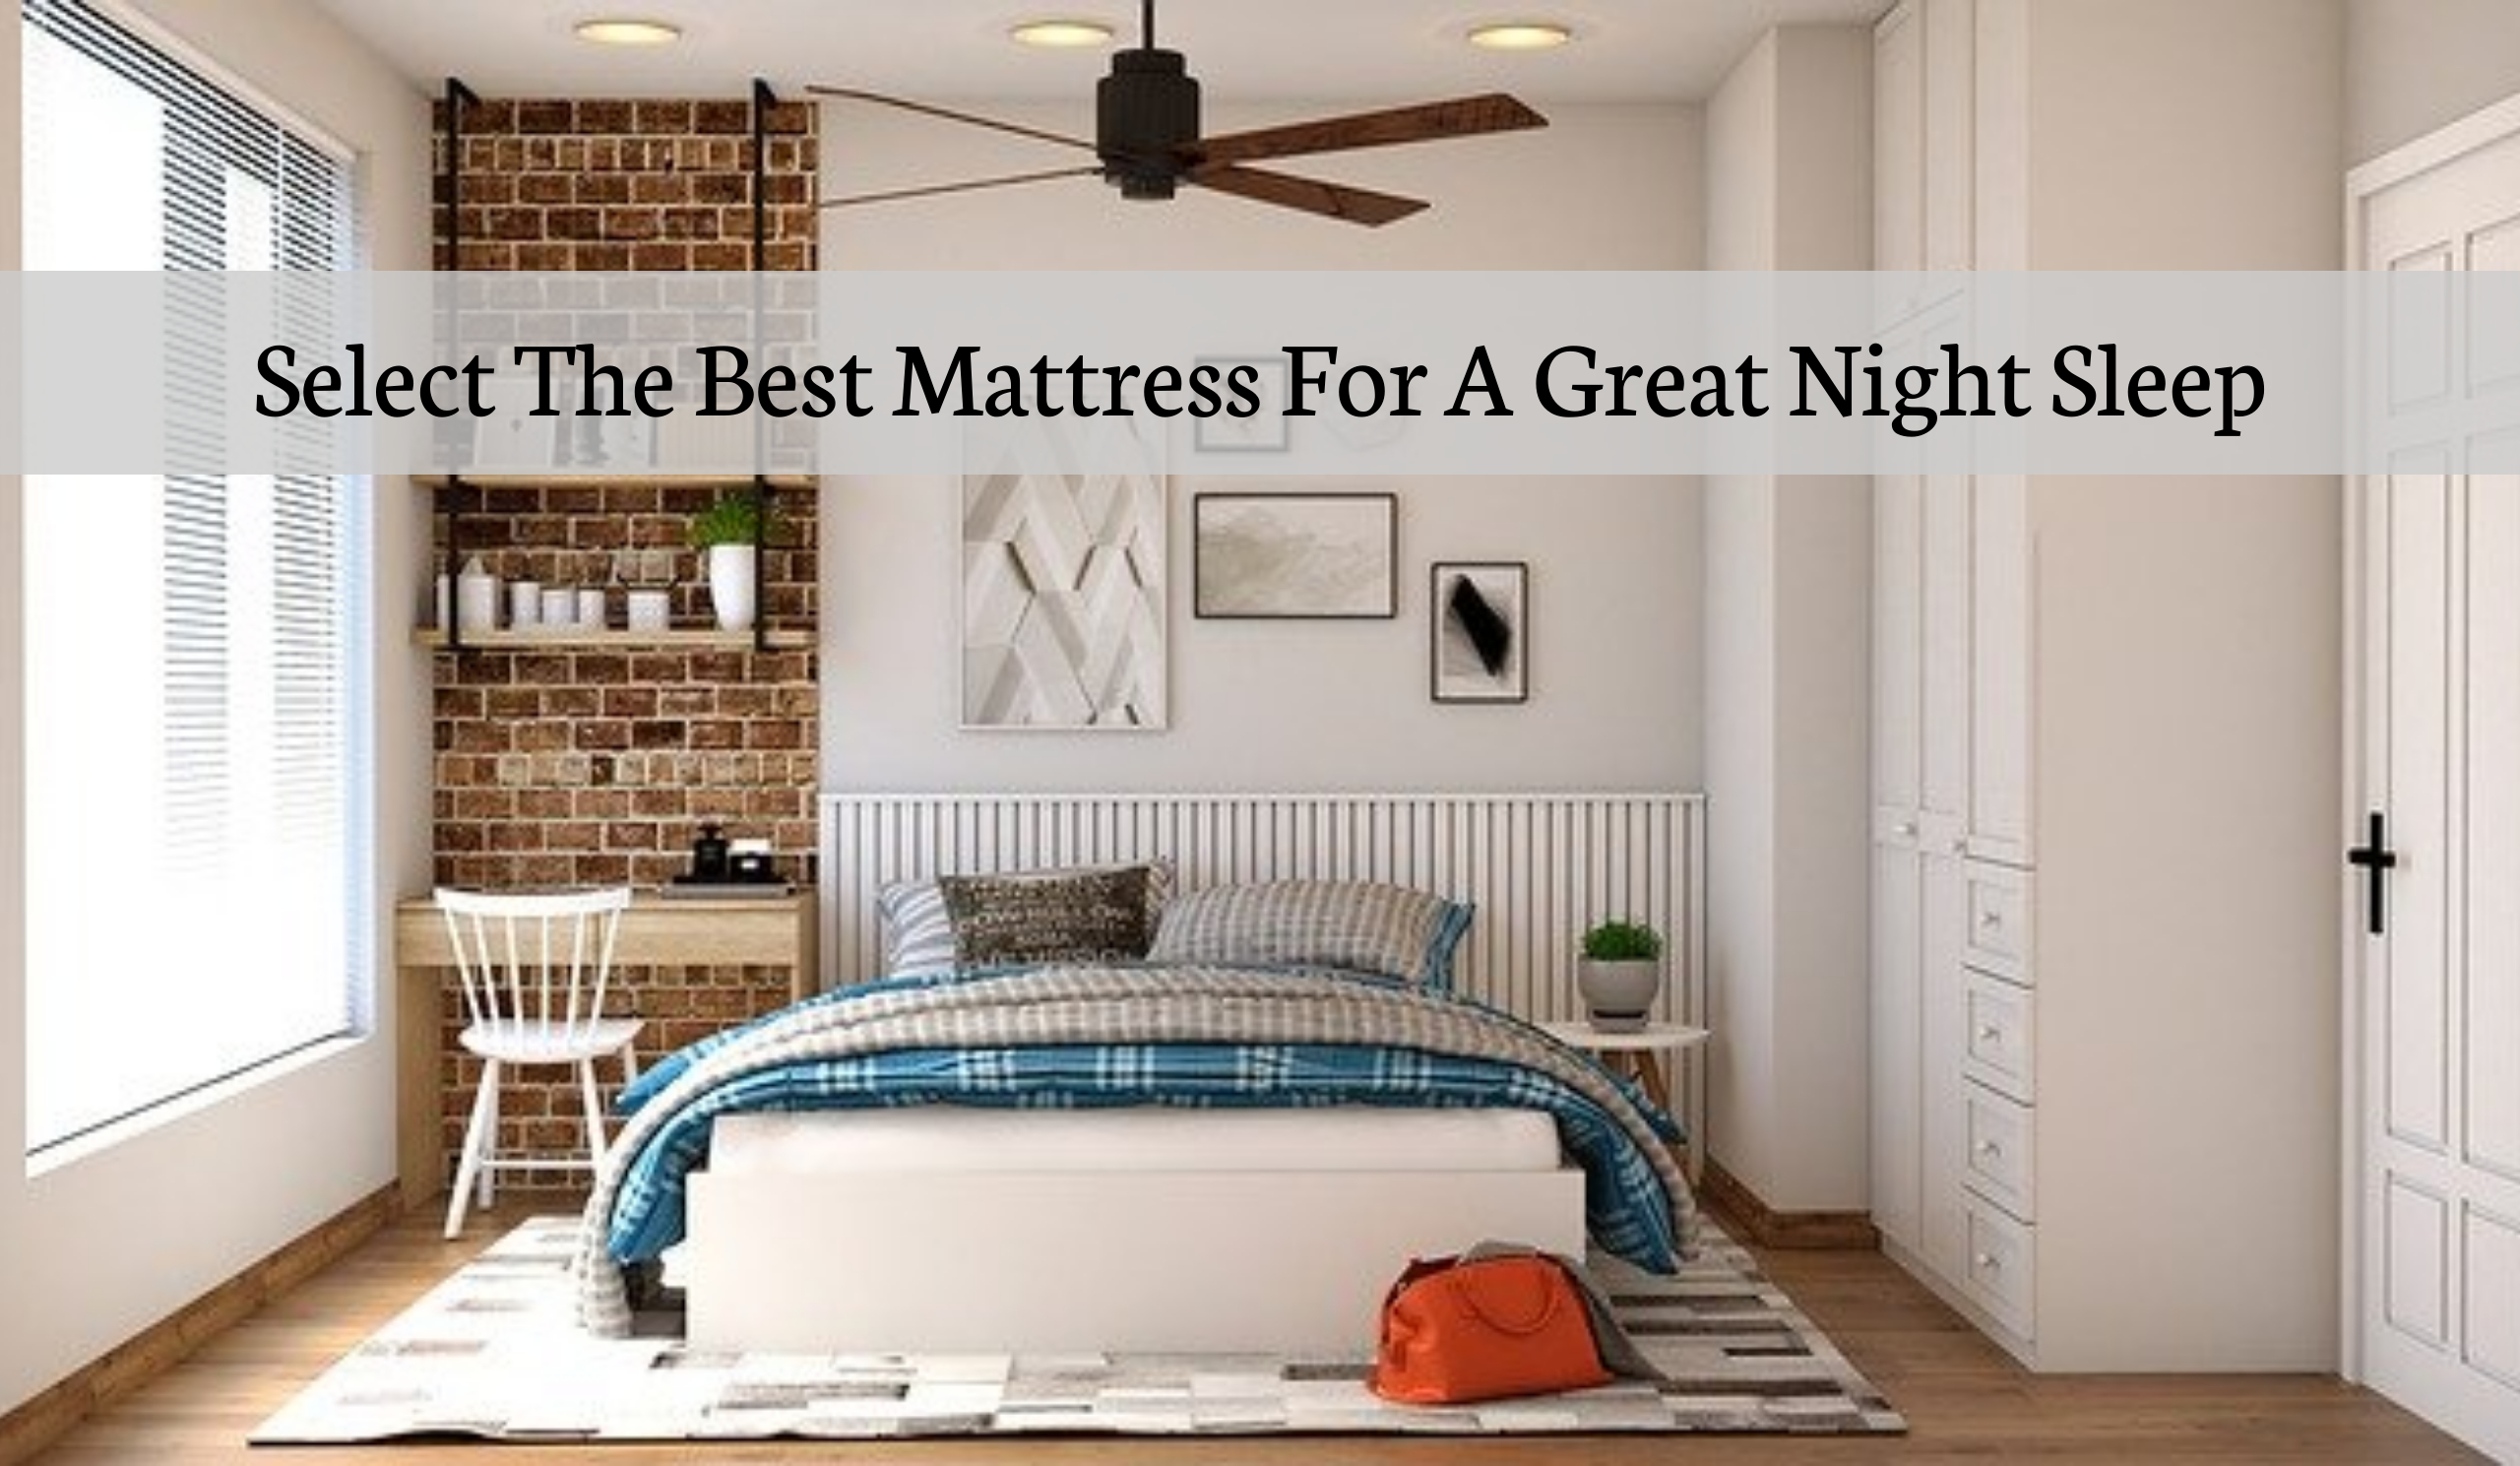 Learn how to select the best mattress for a great night sleep. – March 2021-Max-Quality(1)